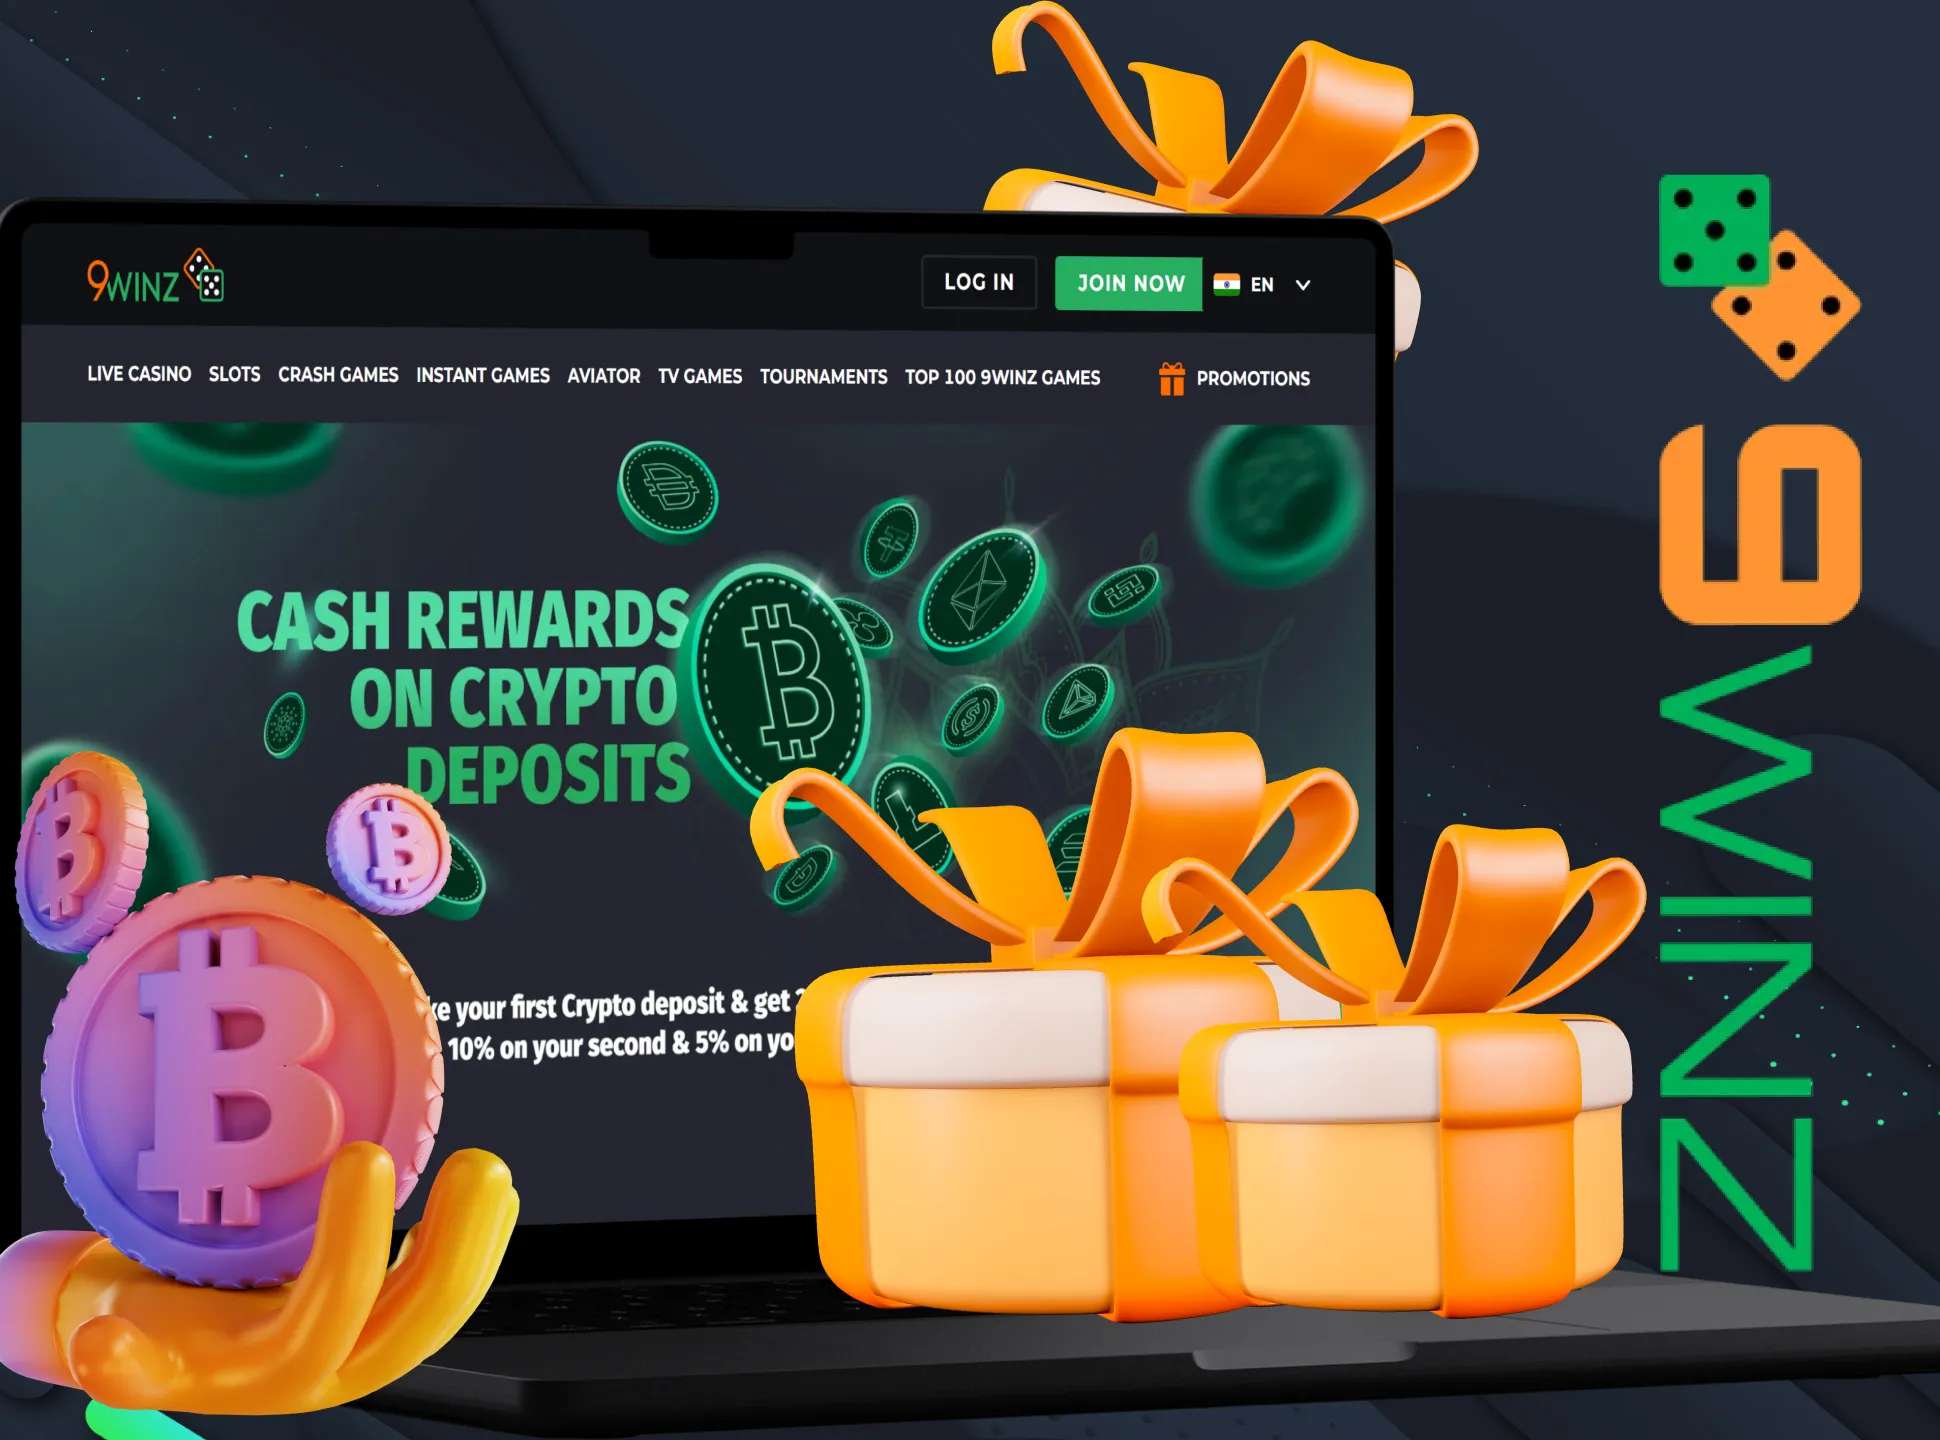 Get your crypto bonus after making deposit at 9winz.